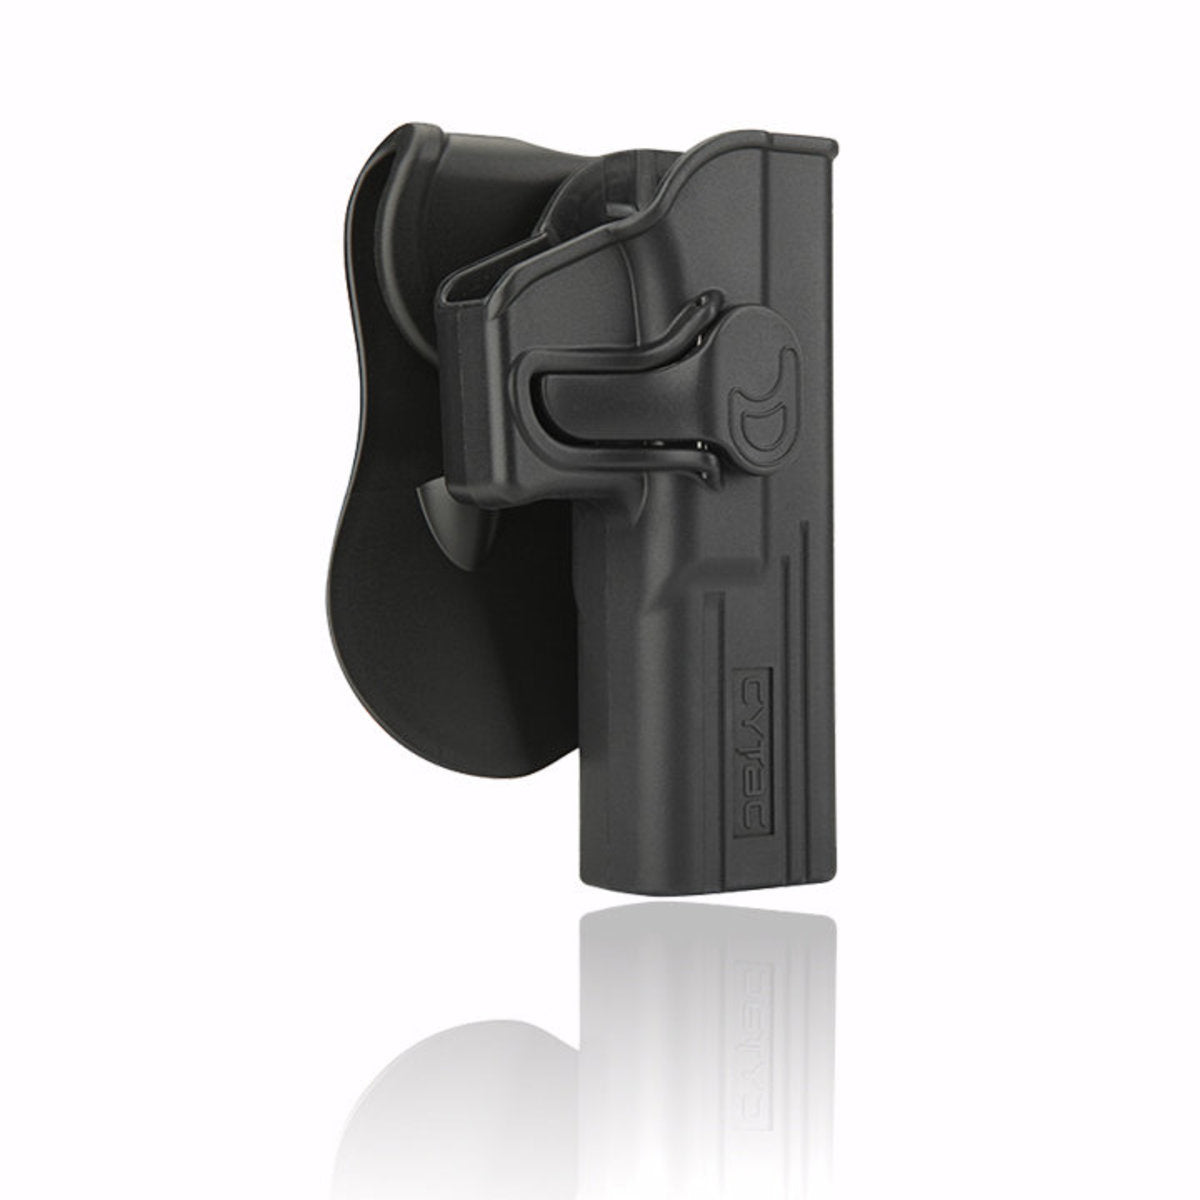 Cytac OWB Holster - Fits GLOCK 17, 22, 31 (Fits Gen 1, 2, 3, 4) - Eminent Paintball And Airsoft